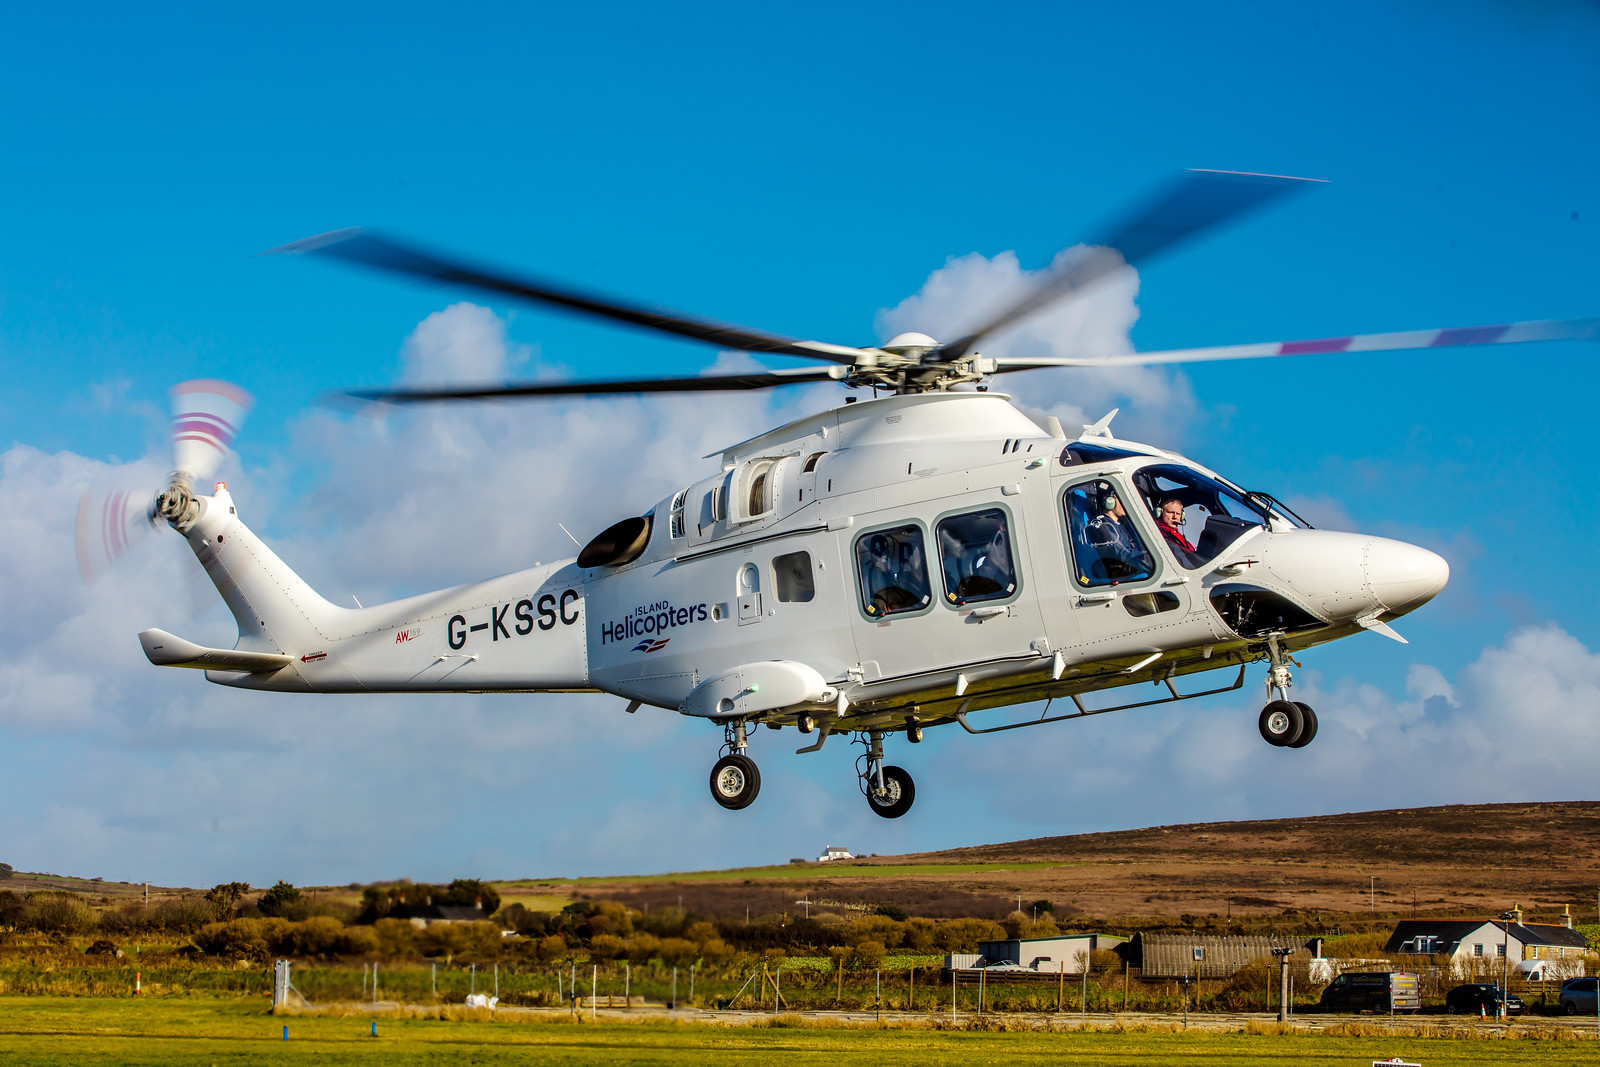 Specialist Aviation Services is one of the fleet leaders on the Leonardo AW169 in the U.K. It will be operating an AW169 for Island Helicopters’ upcoming service to the Isles of Scilly in the U.K. Greg Cagewith Photo